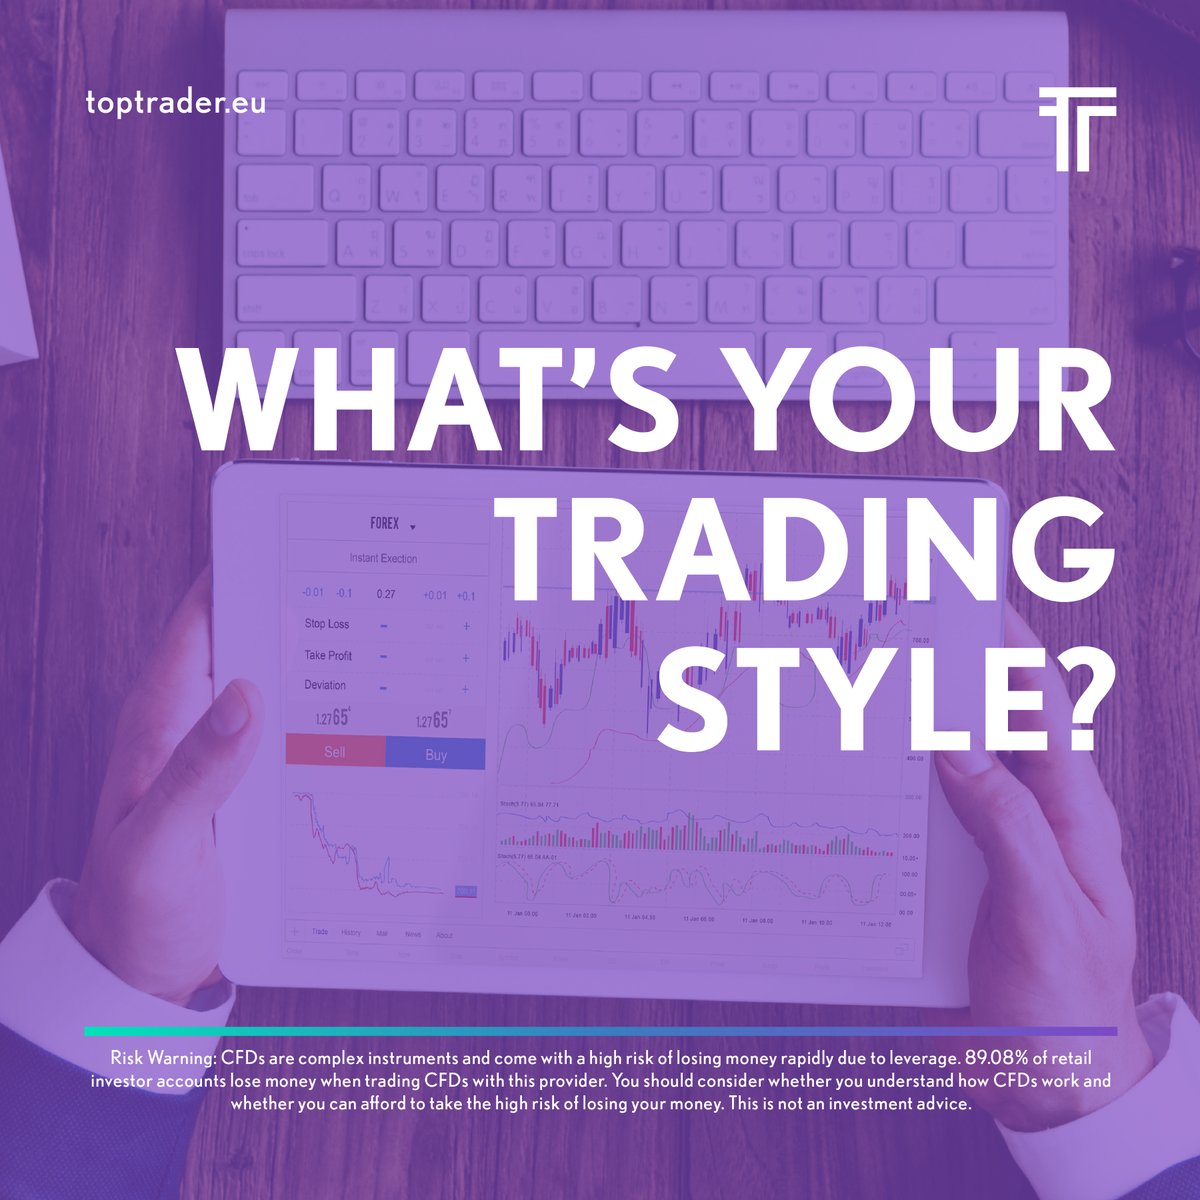 Choose your trading style from the list below:

▪️Day Trading
▪️Swing Trading
▪️Position Trading

Let us know below!

toptrader.eu

Risk Warning: 89.08% of retail investor accounts lose money.

#toptrader #broker #investing #forextrading #forextrader #tradingstyle